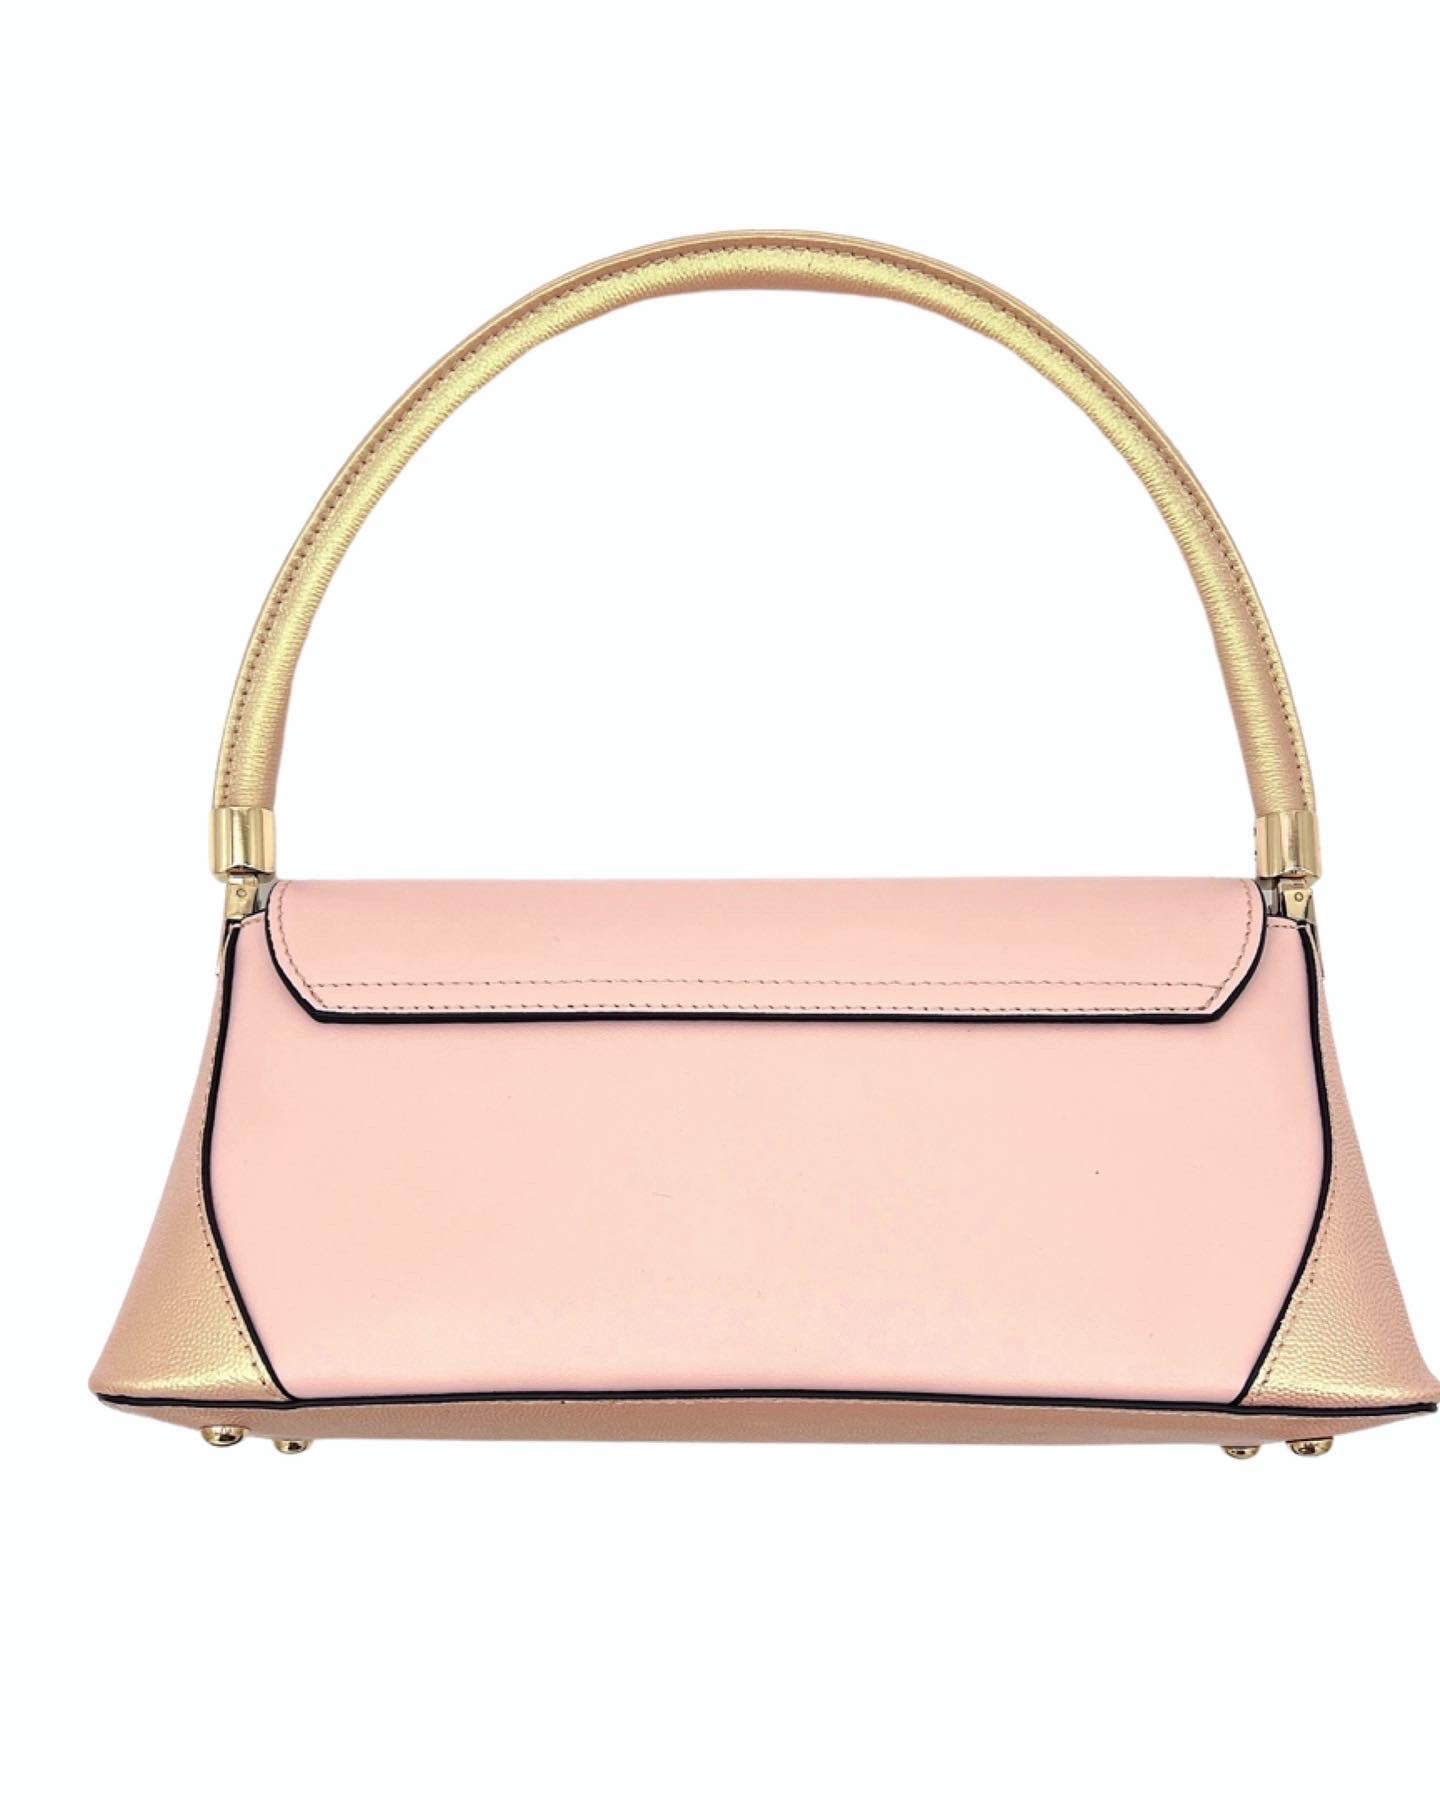 Trinity Bag in Ballet Pink